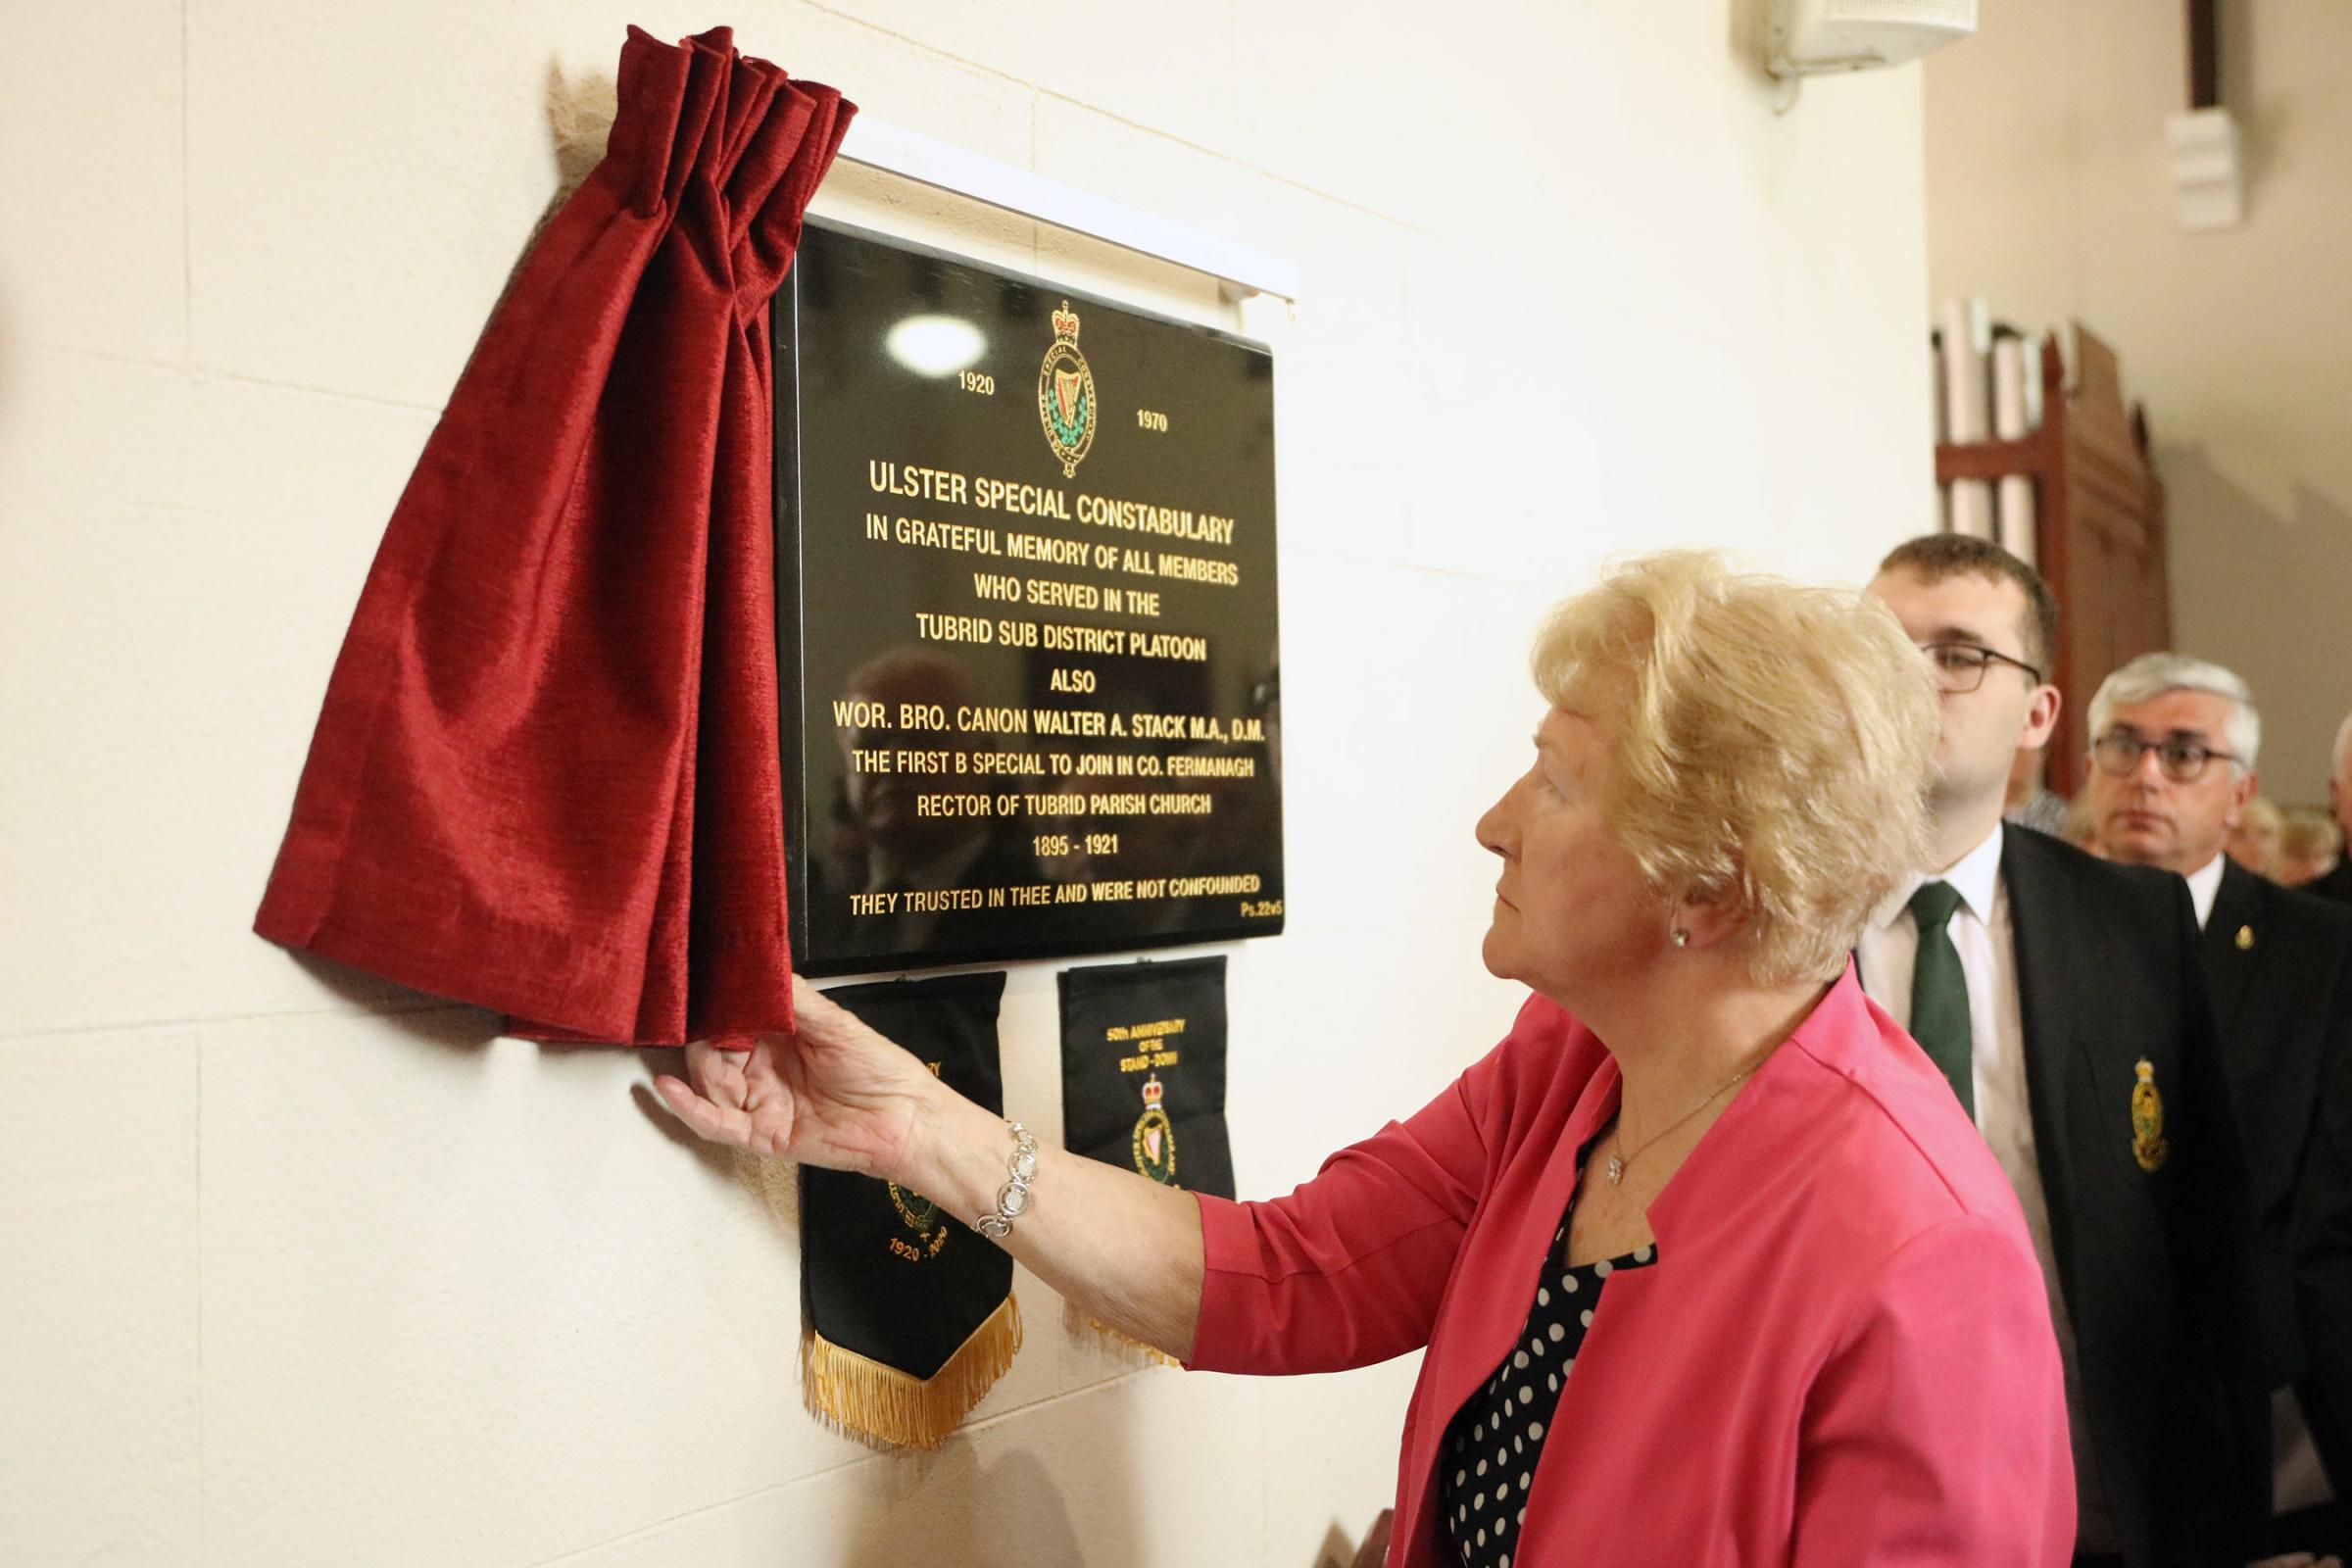 New plaque in Fermanagh commemorates role of Ulster Special Constabulary